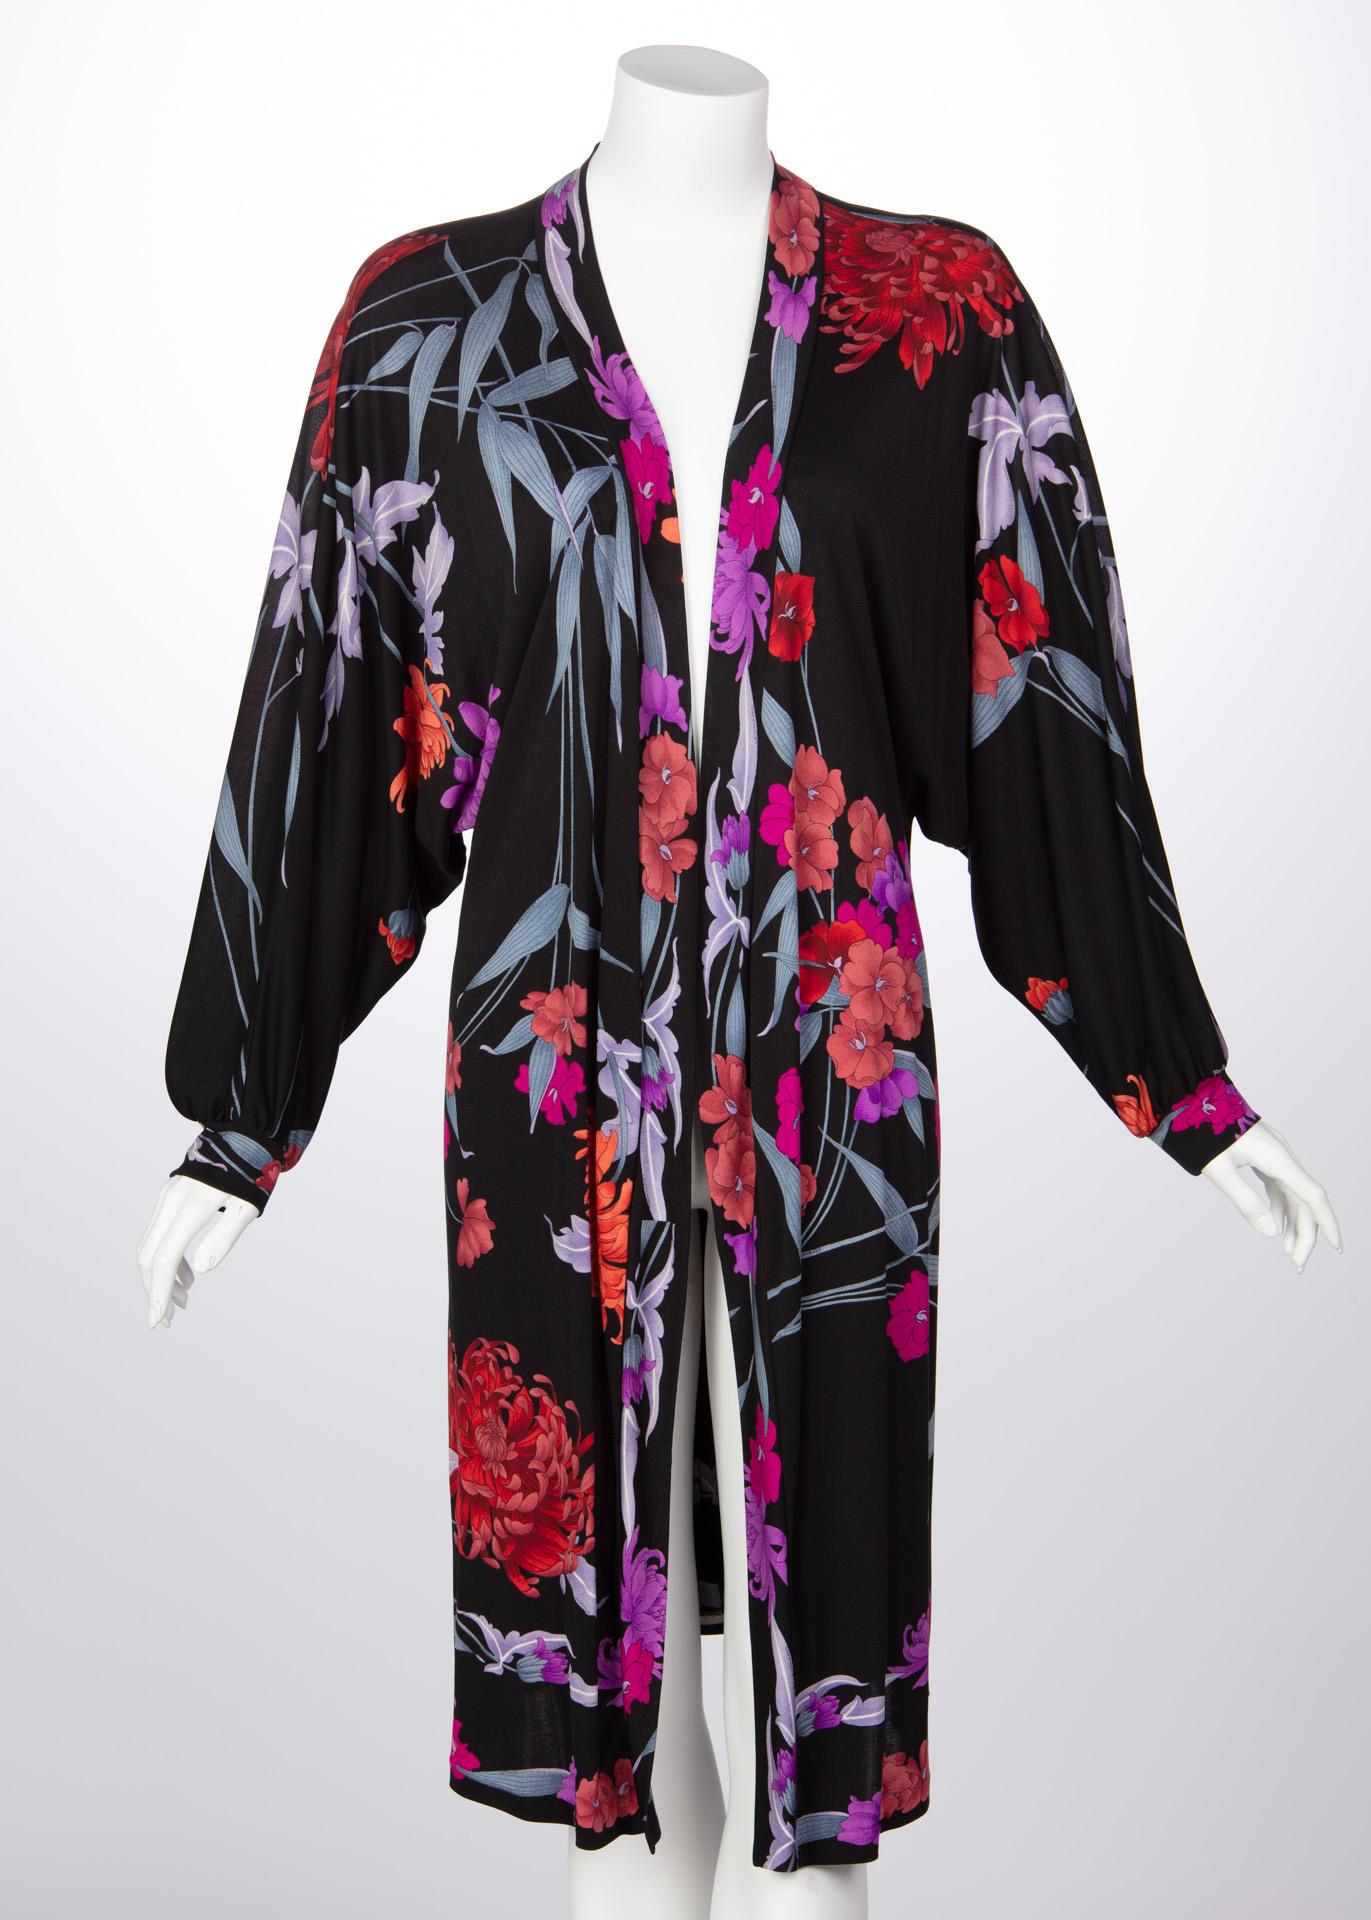 Leonard fashions are widely known for their bold and meticulous prints. Having been compared to the designs of Italian designer, Emilio Pucci, Leonard retains a particular softness in theirs. After 1970, the Leonard brand introduced luxury jersey